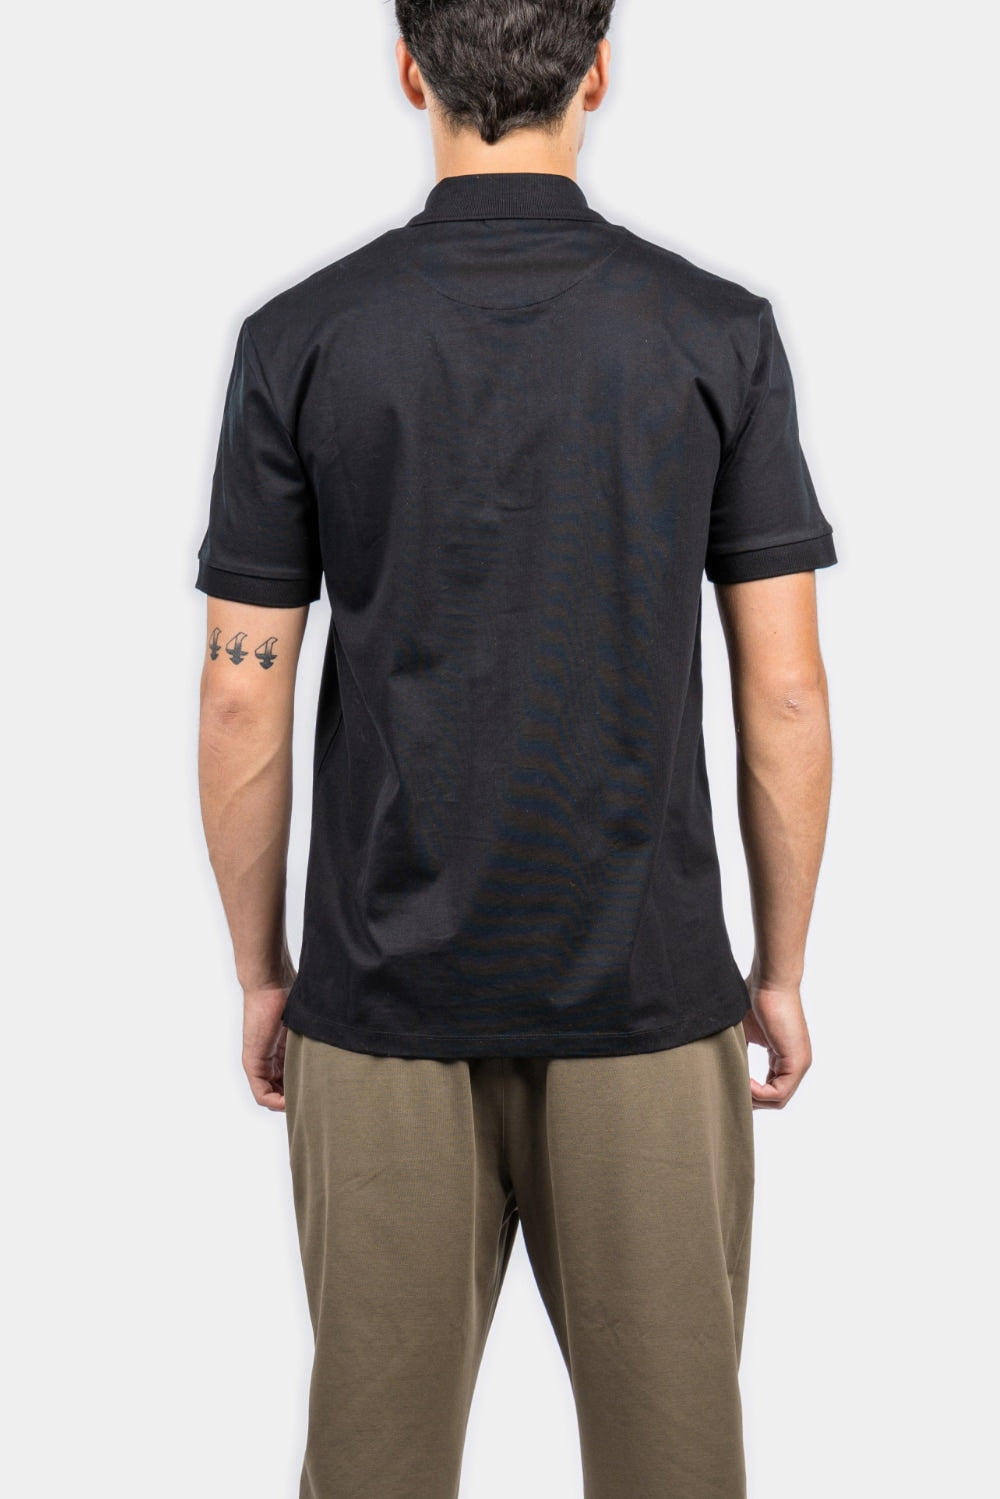 Heart Patch Jersey Black Polo